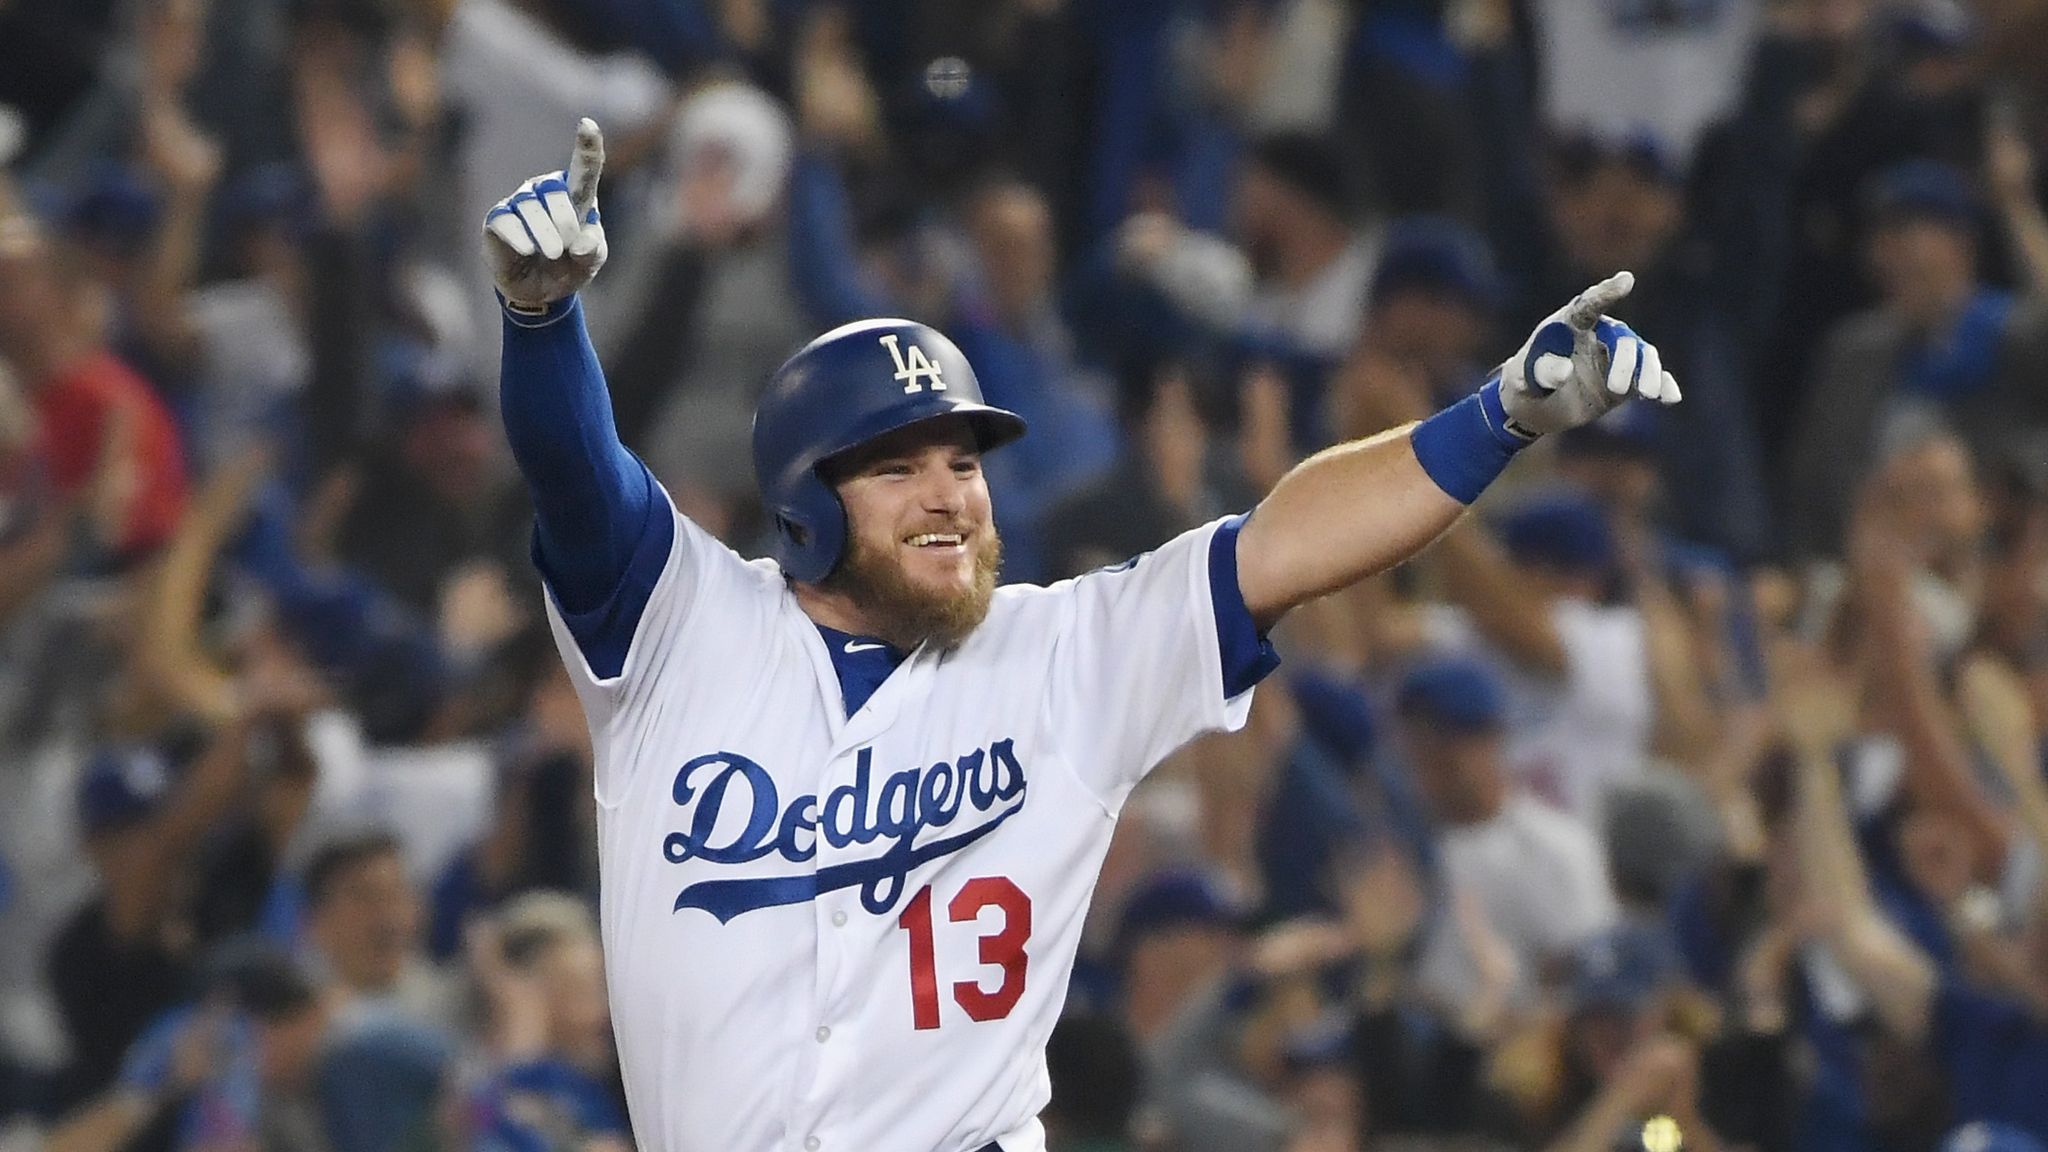 LA Dodgers beat Boston Red Sox in longest-ever World Series game